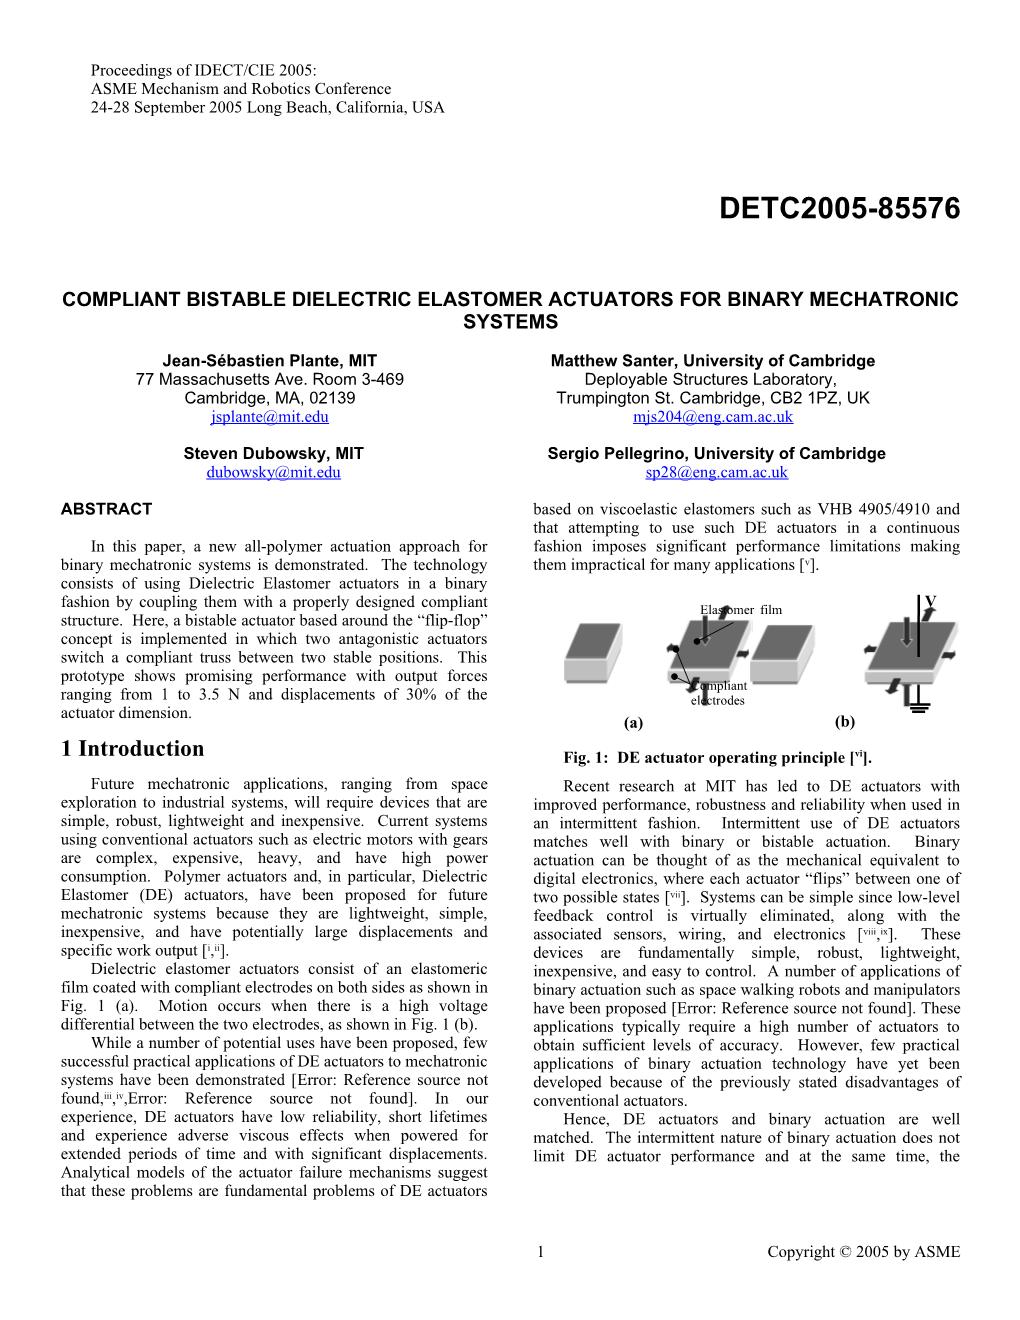 Compliant Bistable Dielectric Elastomer Actuators for Binary Mechatronic Systems